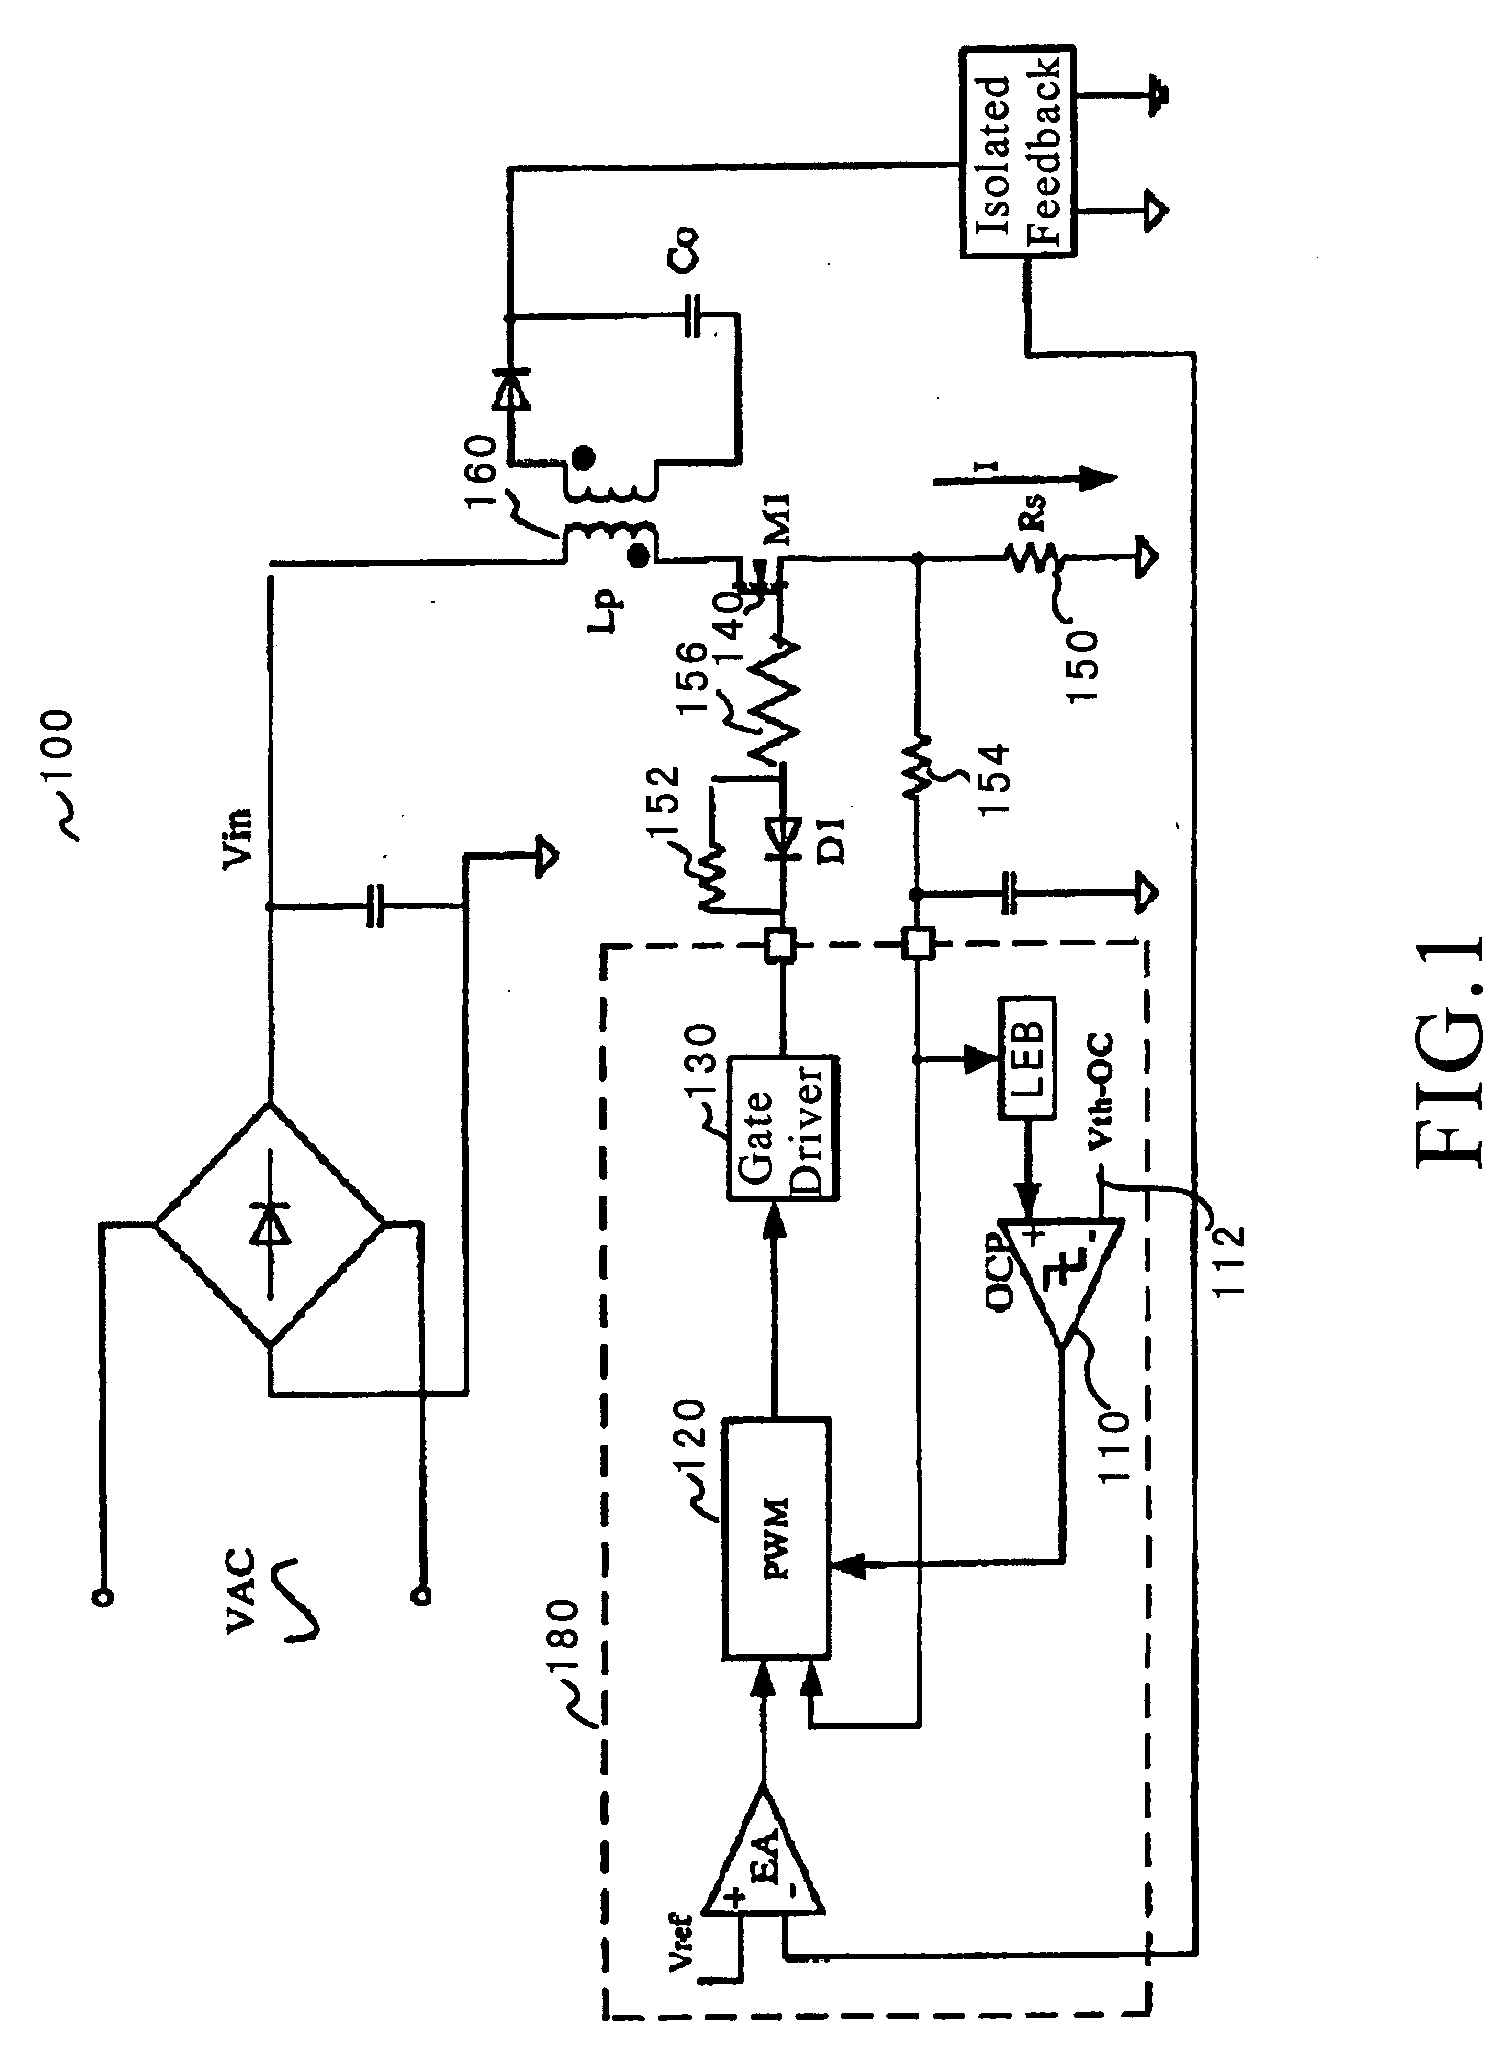 System and method for providing switching to power regulators